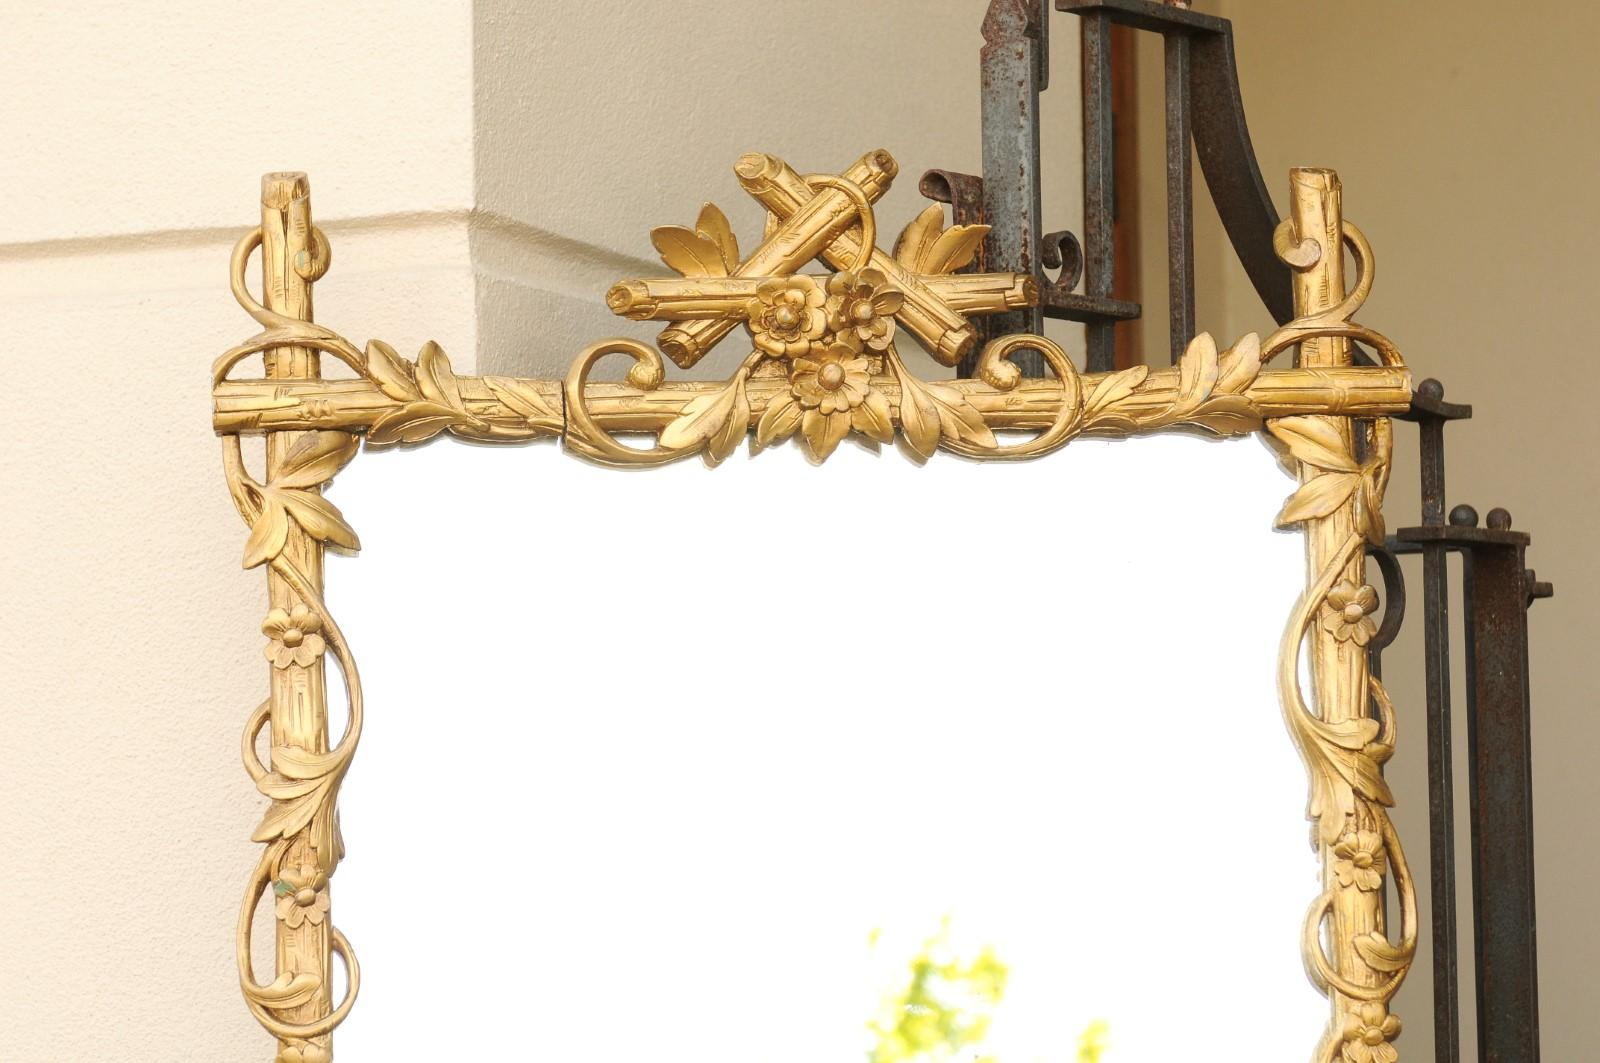 20th Century French 1900s Carved Giltwood Tall Mirror with Faux Branches and Floral Décor